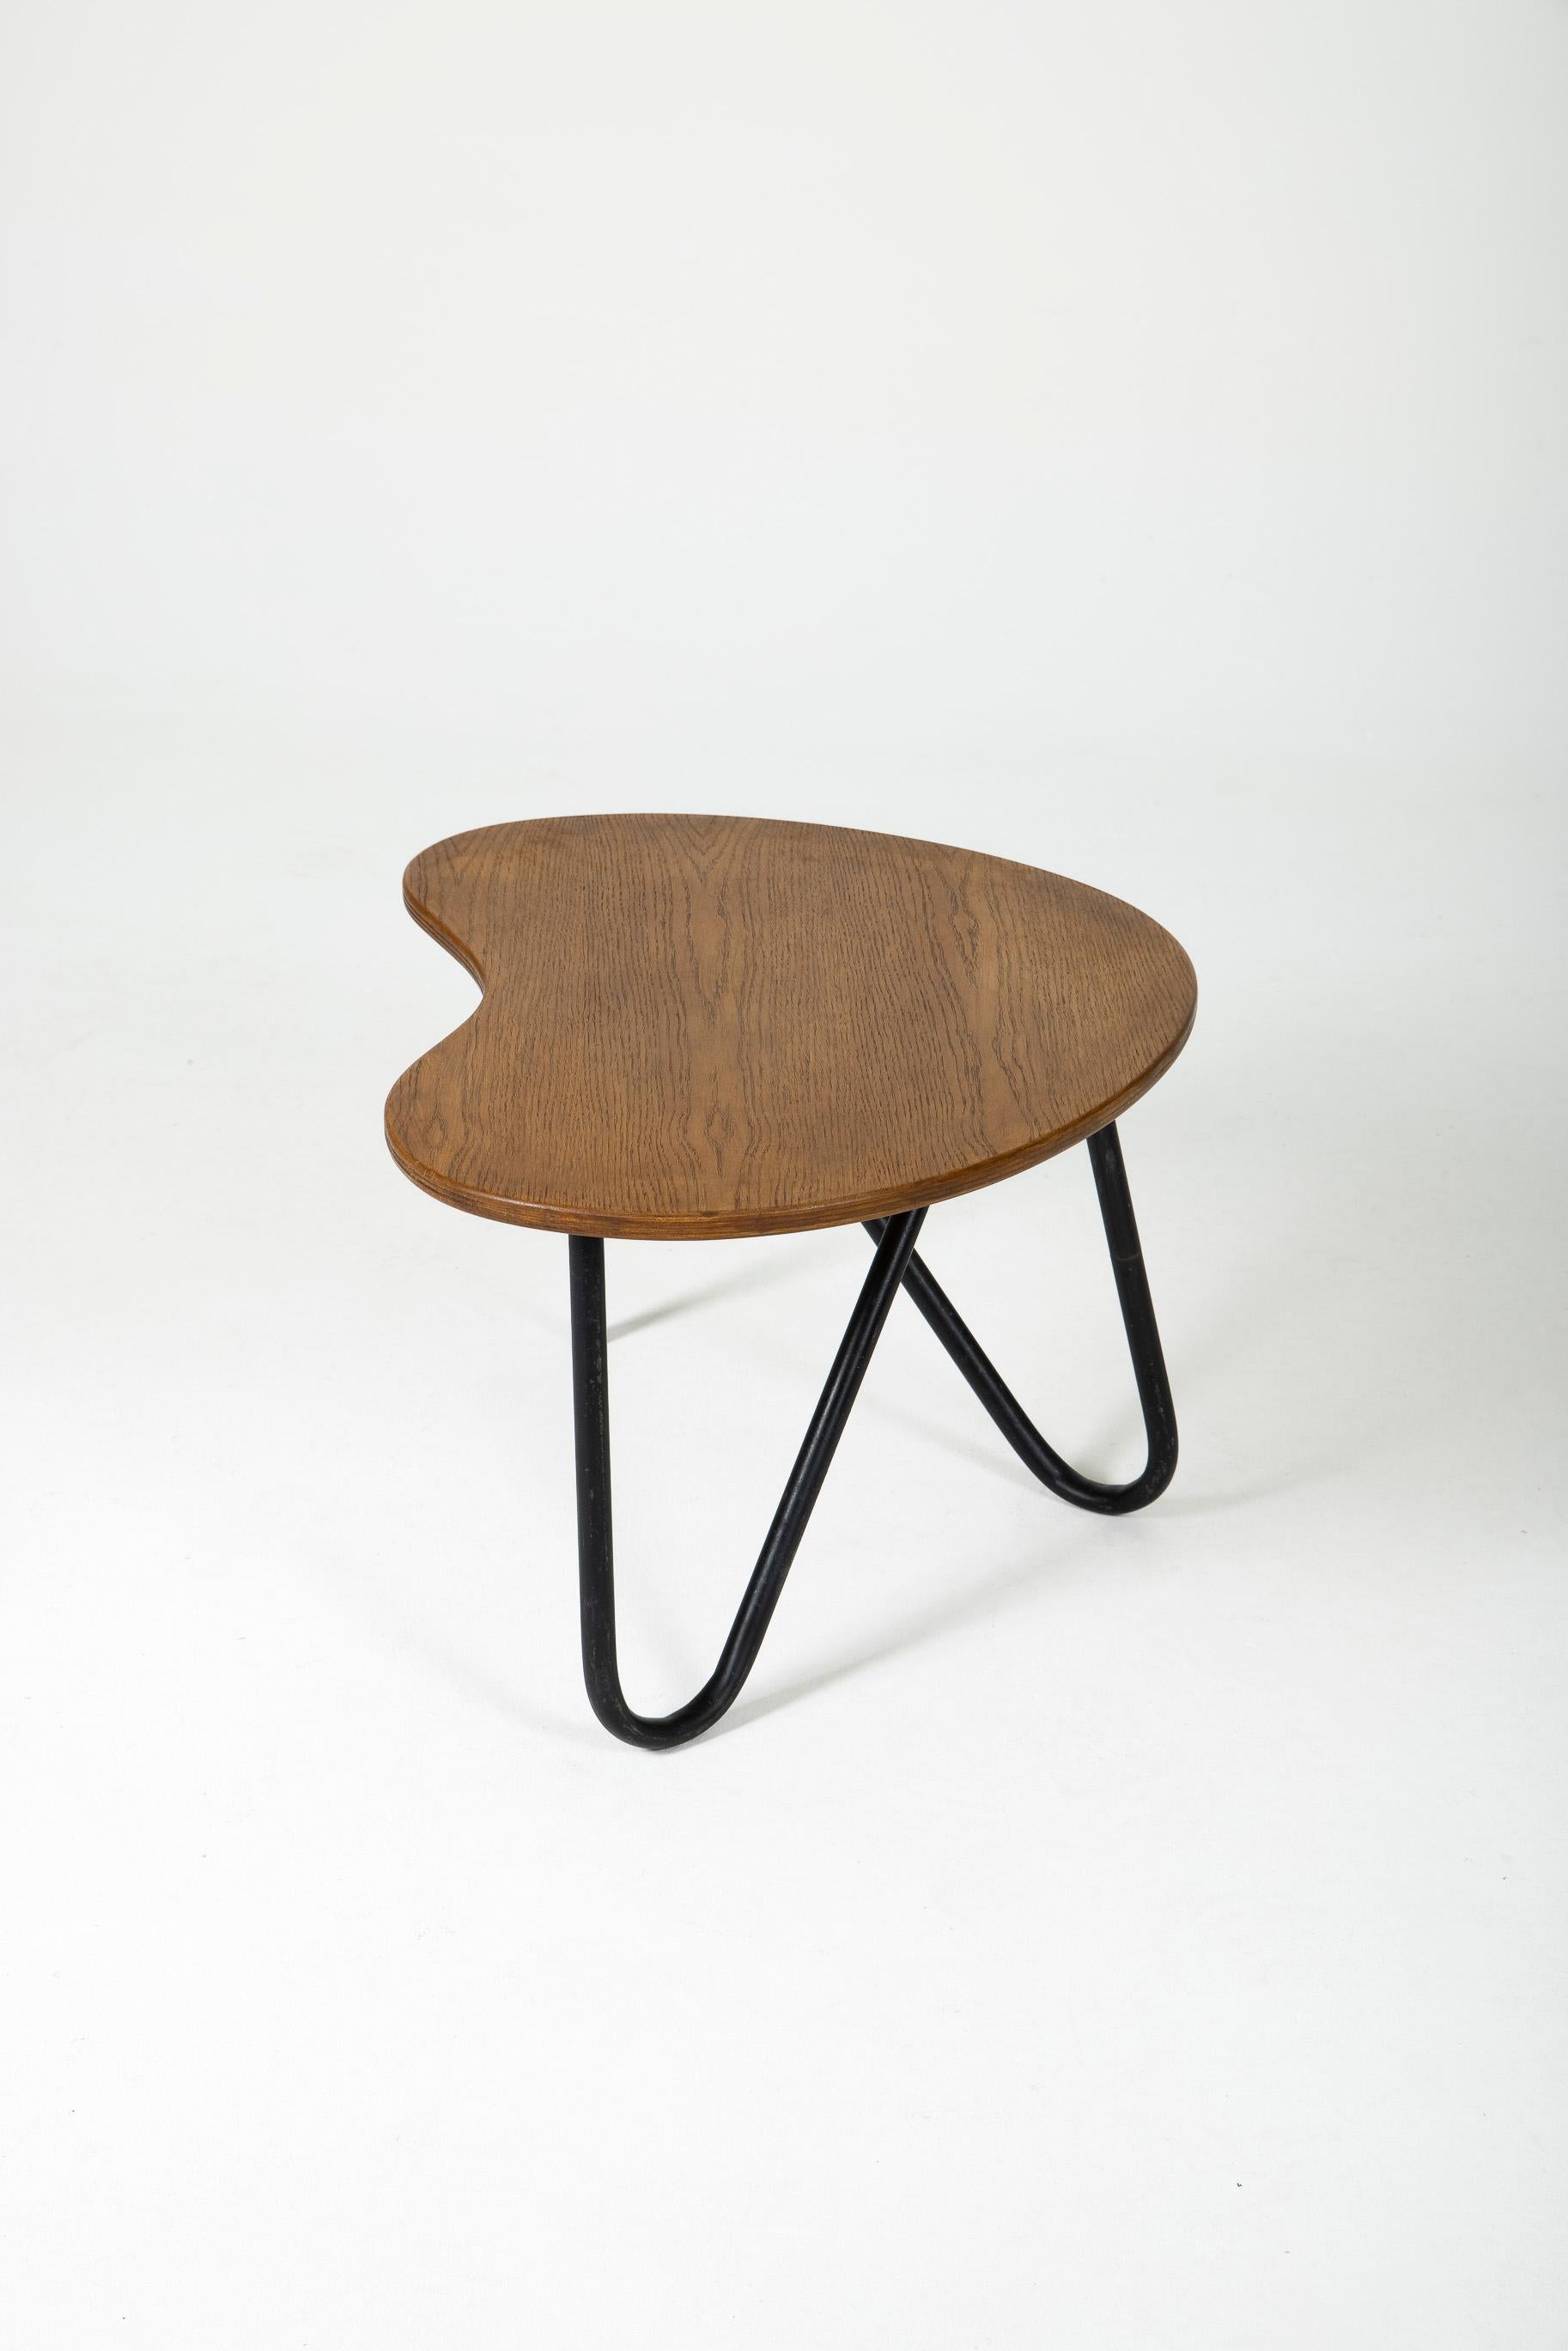 20th Century Coffee table in wood by Perfacto Pierre Guariche